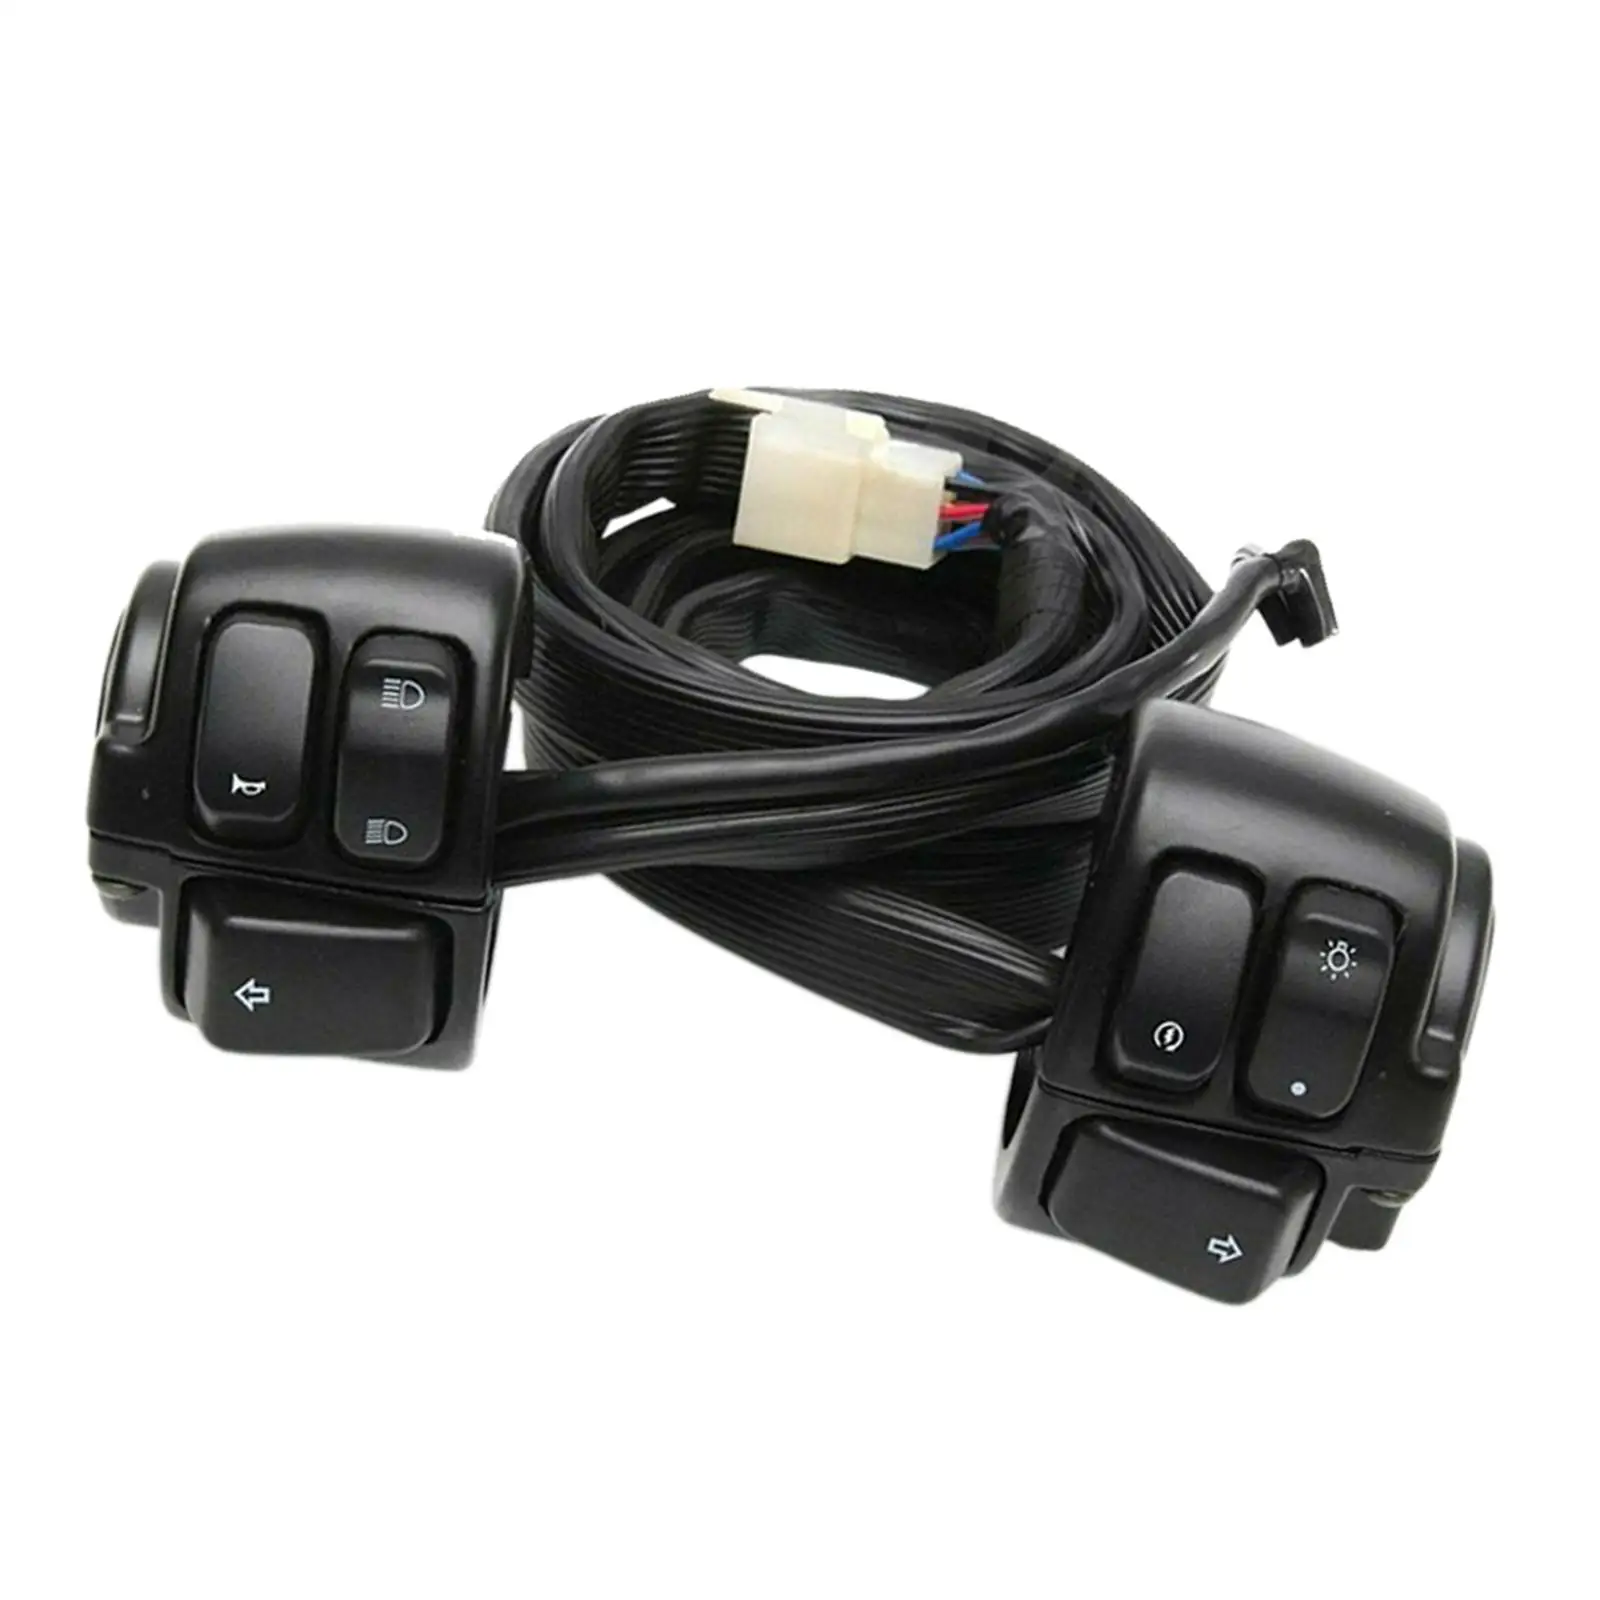  Motorcycle 25mm Handlebar Control Switch with Wiring Harness Fit for 1200 Replacement on- ,Easy to Install Waterproof